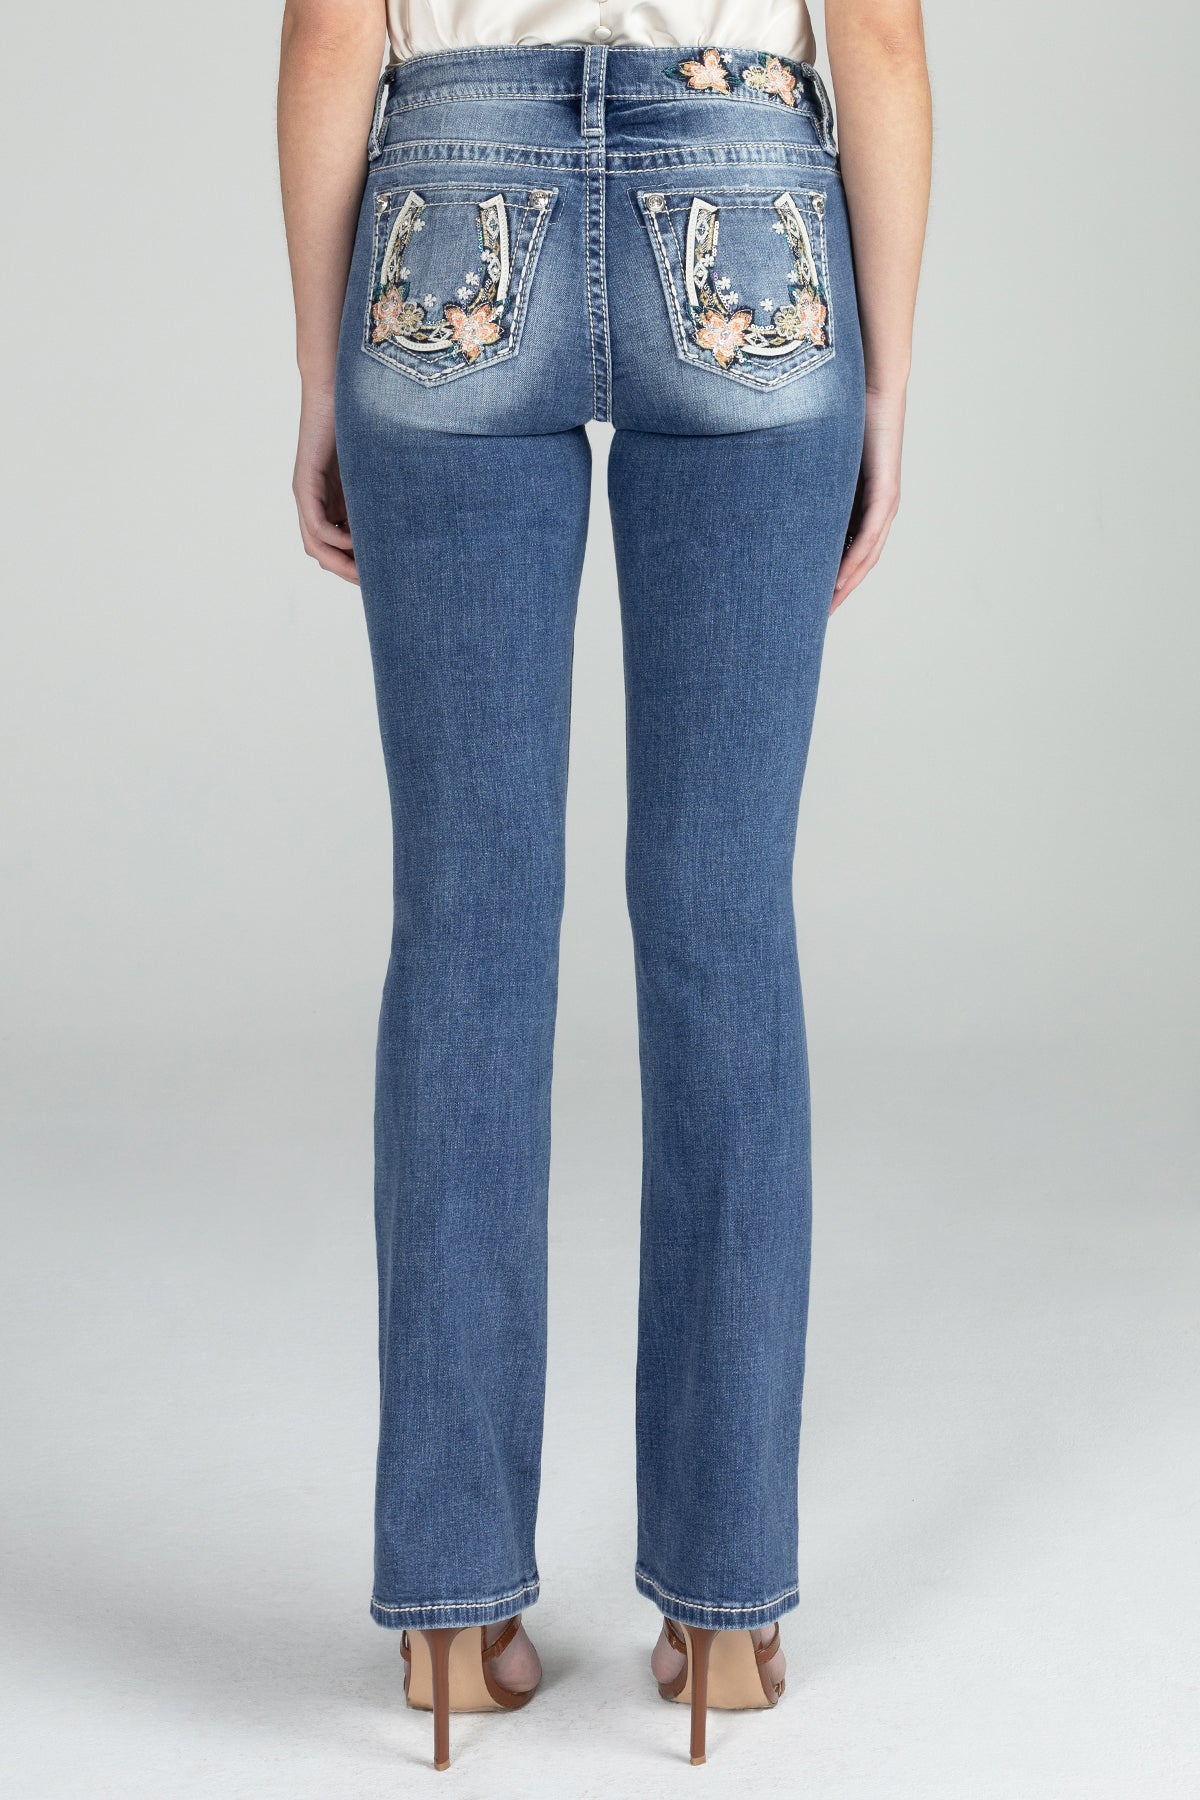 Mid Rise Embroidered Lucky Horse Shoe Pocket Bootcut Jeans